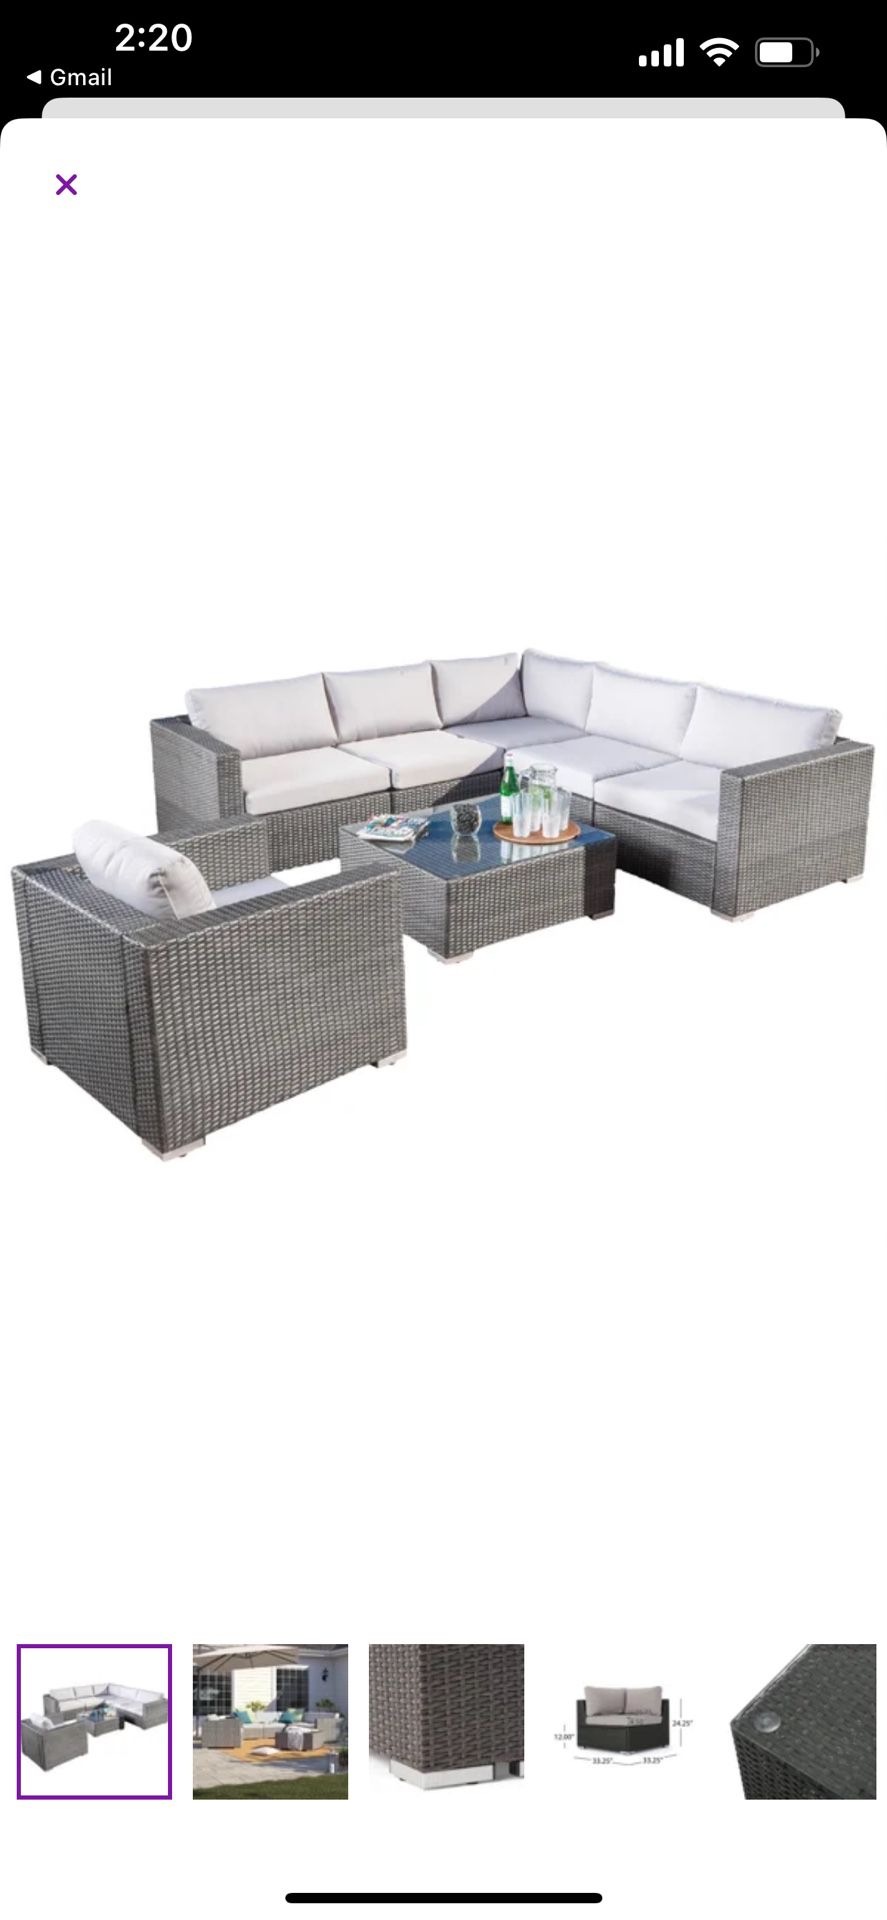 Outdoor Sectional Couch, Chair and Table (furniture set)